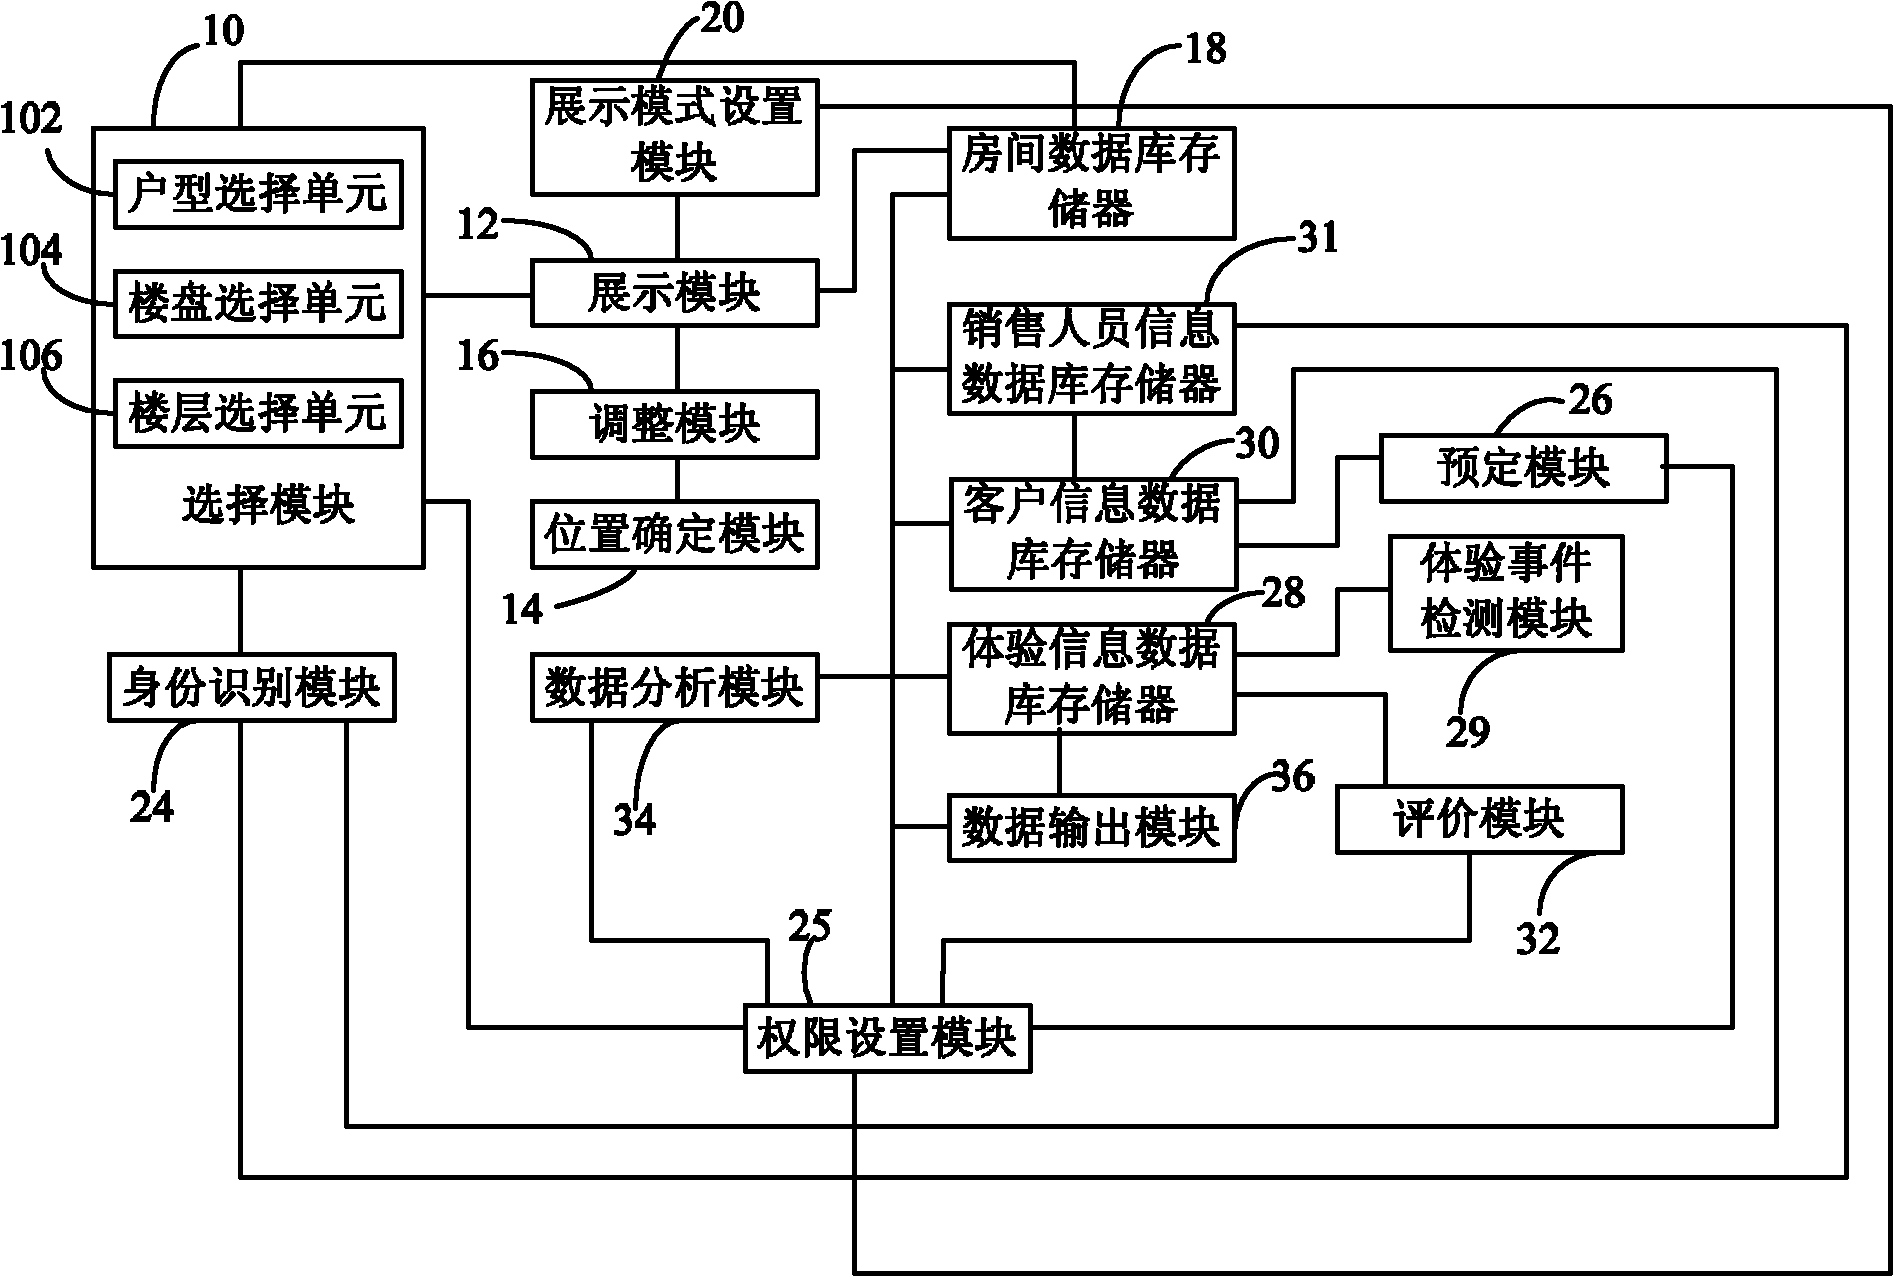 MVR (Measurable Virtual Reality) self-service house choosing system and method